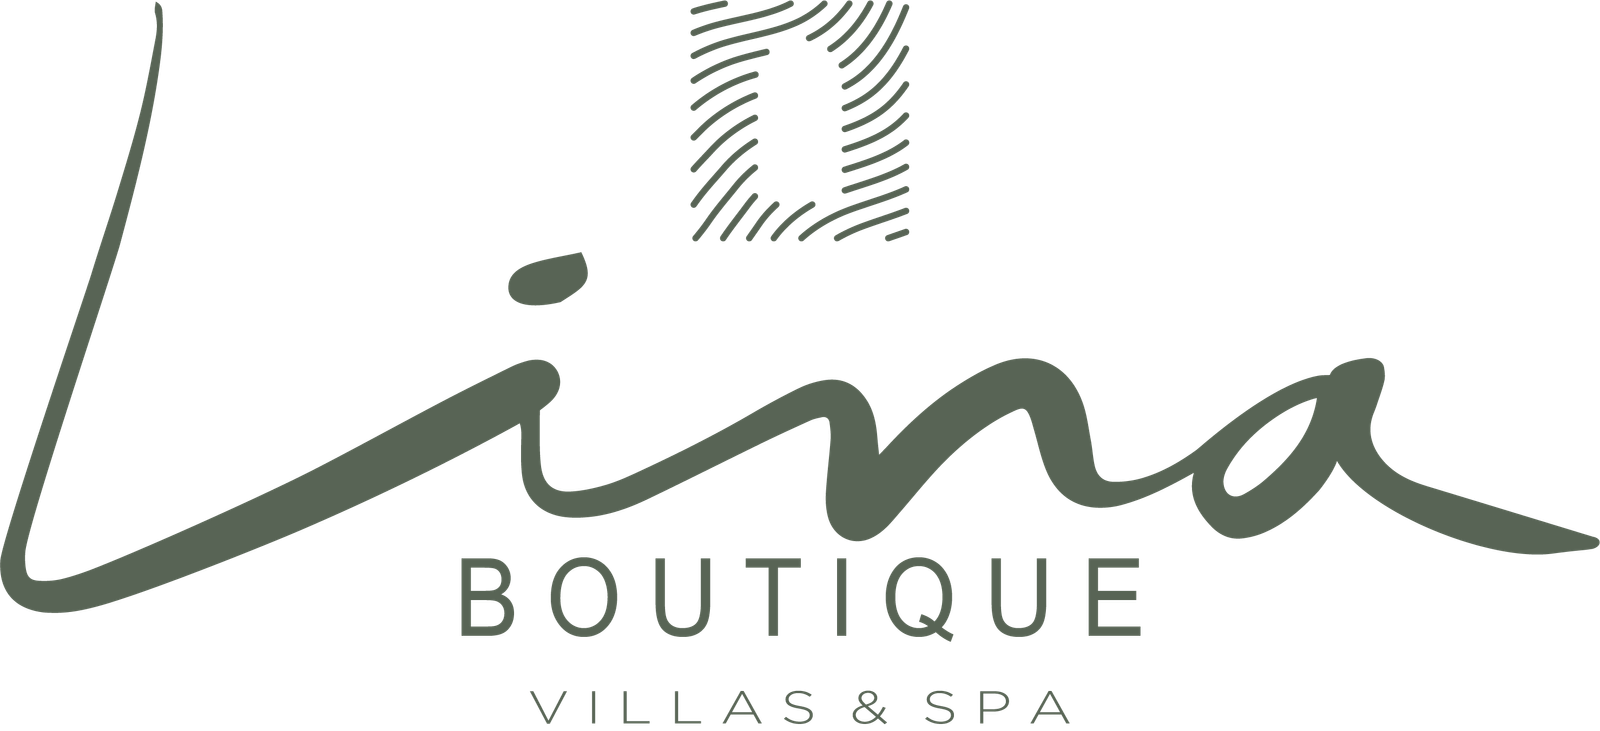 Lina Boutique Villas and Spa – Brings Moroccan Hospitality to Indonesia ...